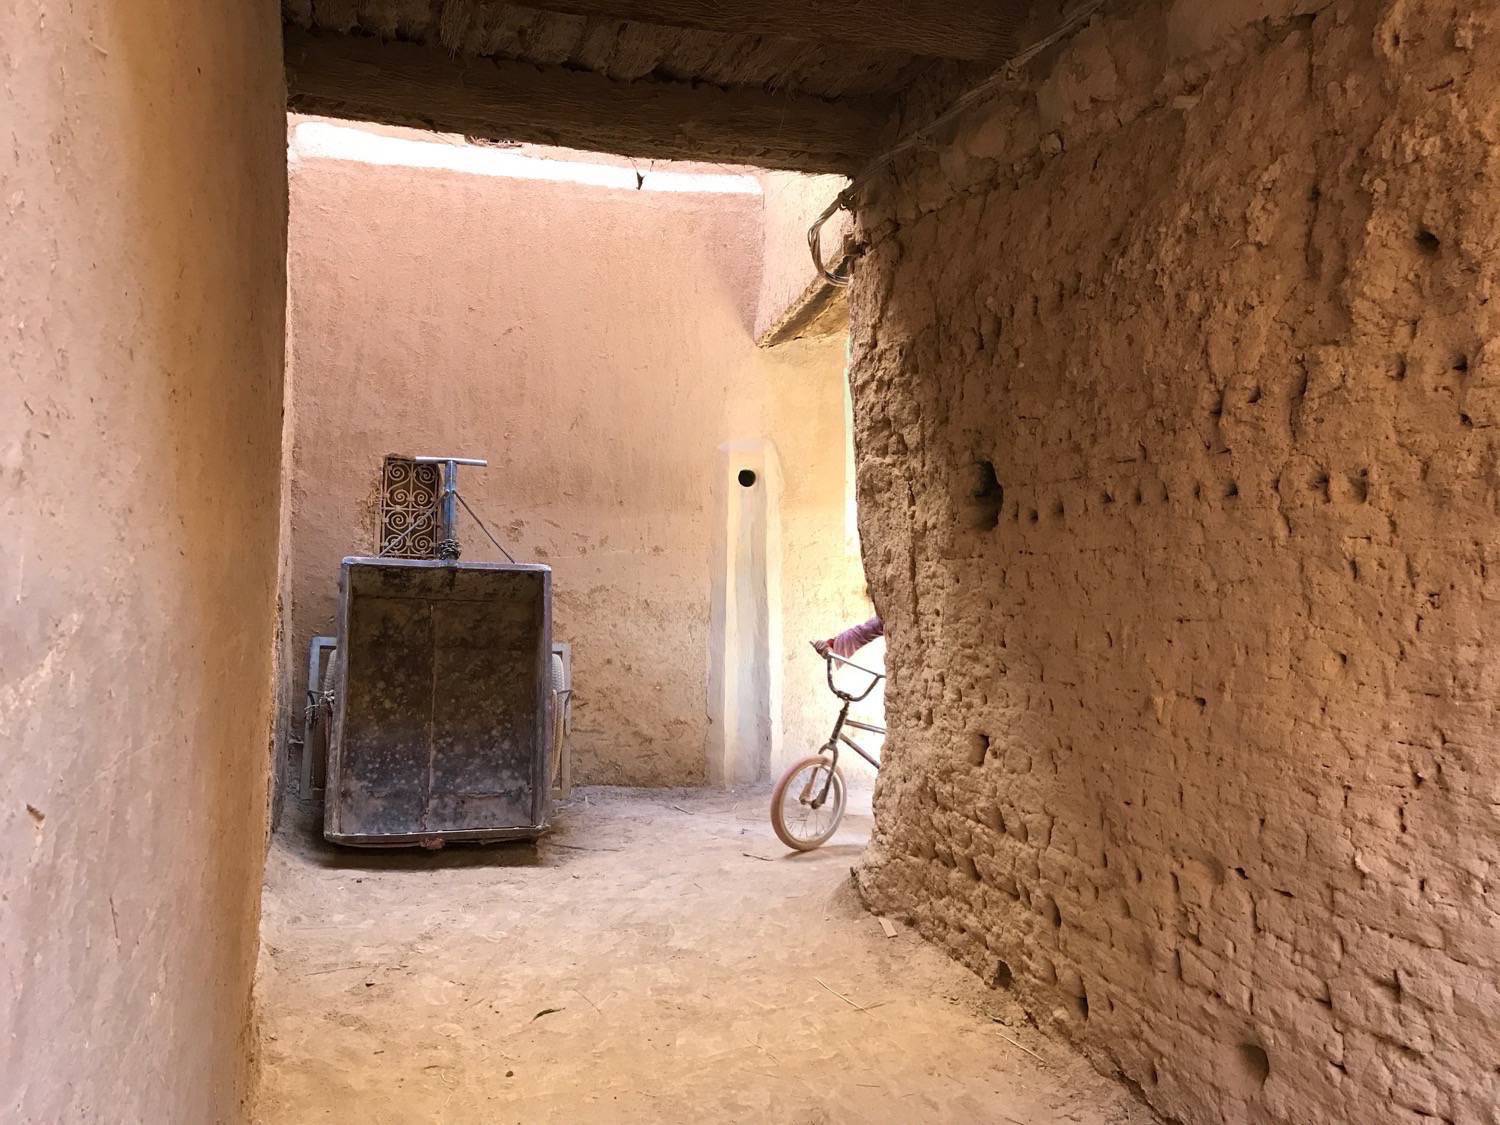 Ksar Rissani - A corner alleyway  showing a wheeled cart used to bring in heavy items into the Ksar.  This section shows some of the different construction finishes as well as some exposed palm wood on the ceiling  